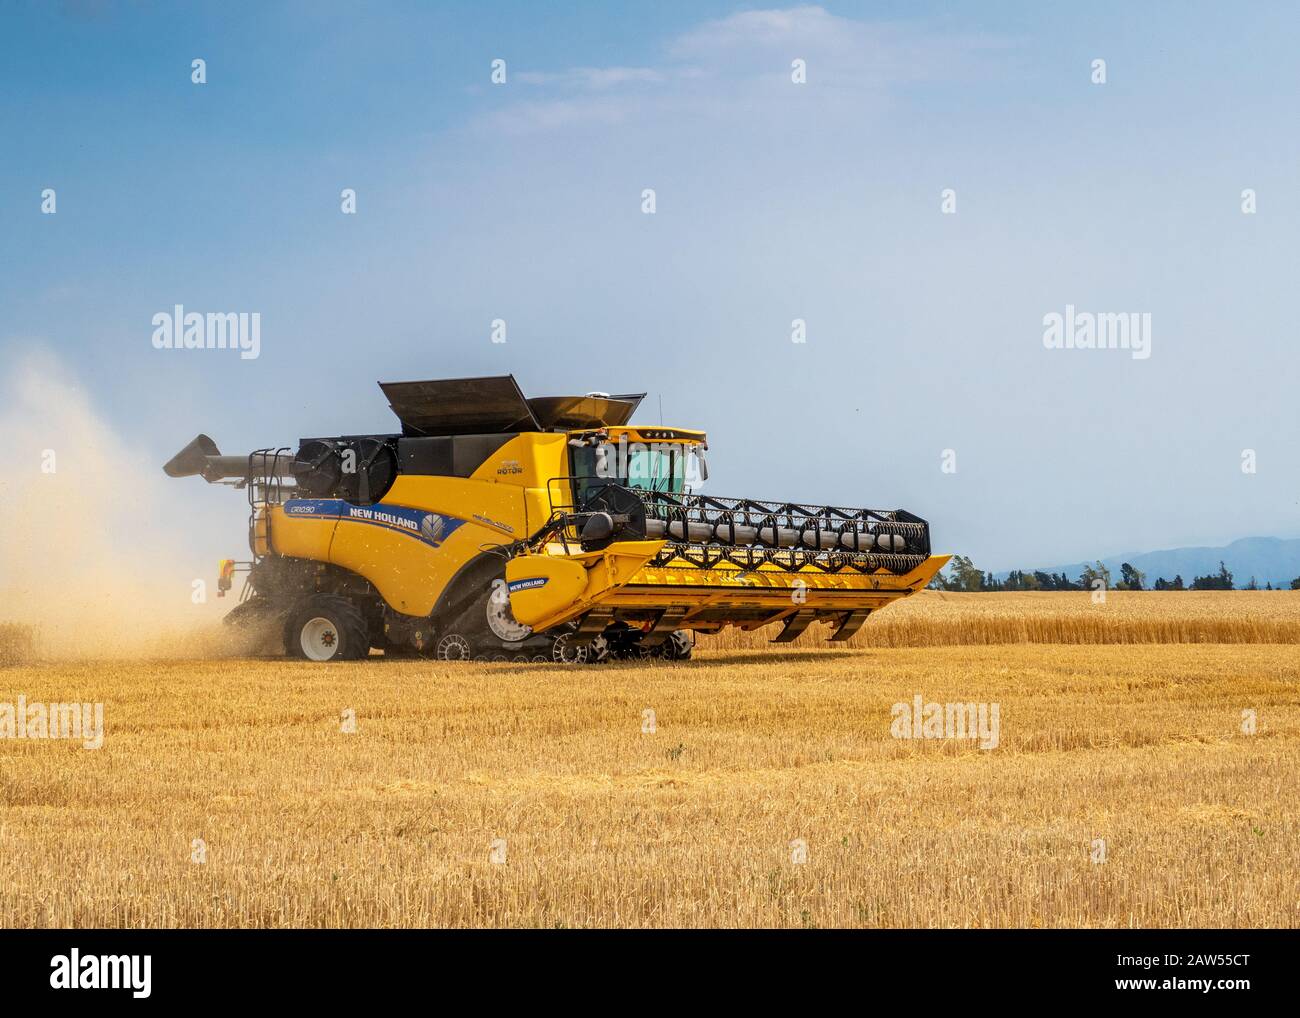 Canterbury, New Zealand, February 2 2020: A New Holland combine harvester working in a field of barley in summer Stock Photo